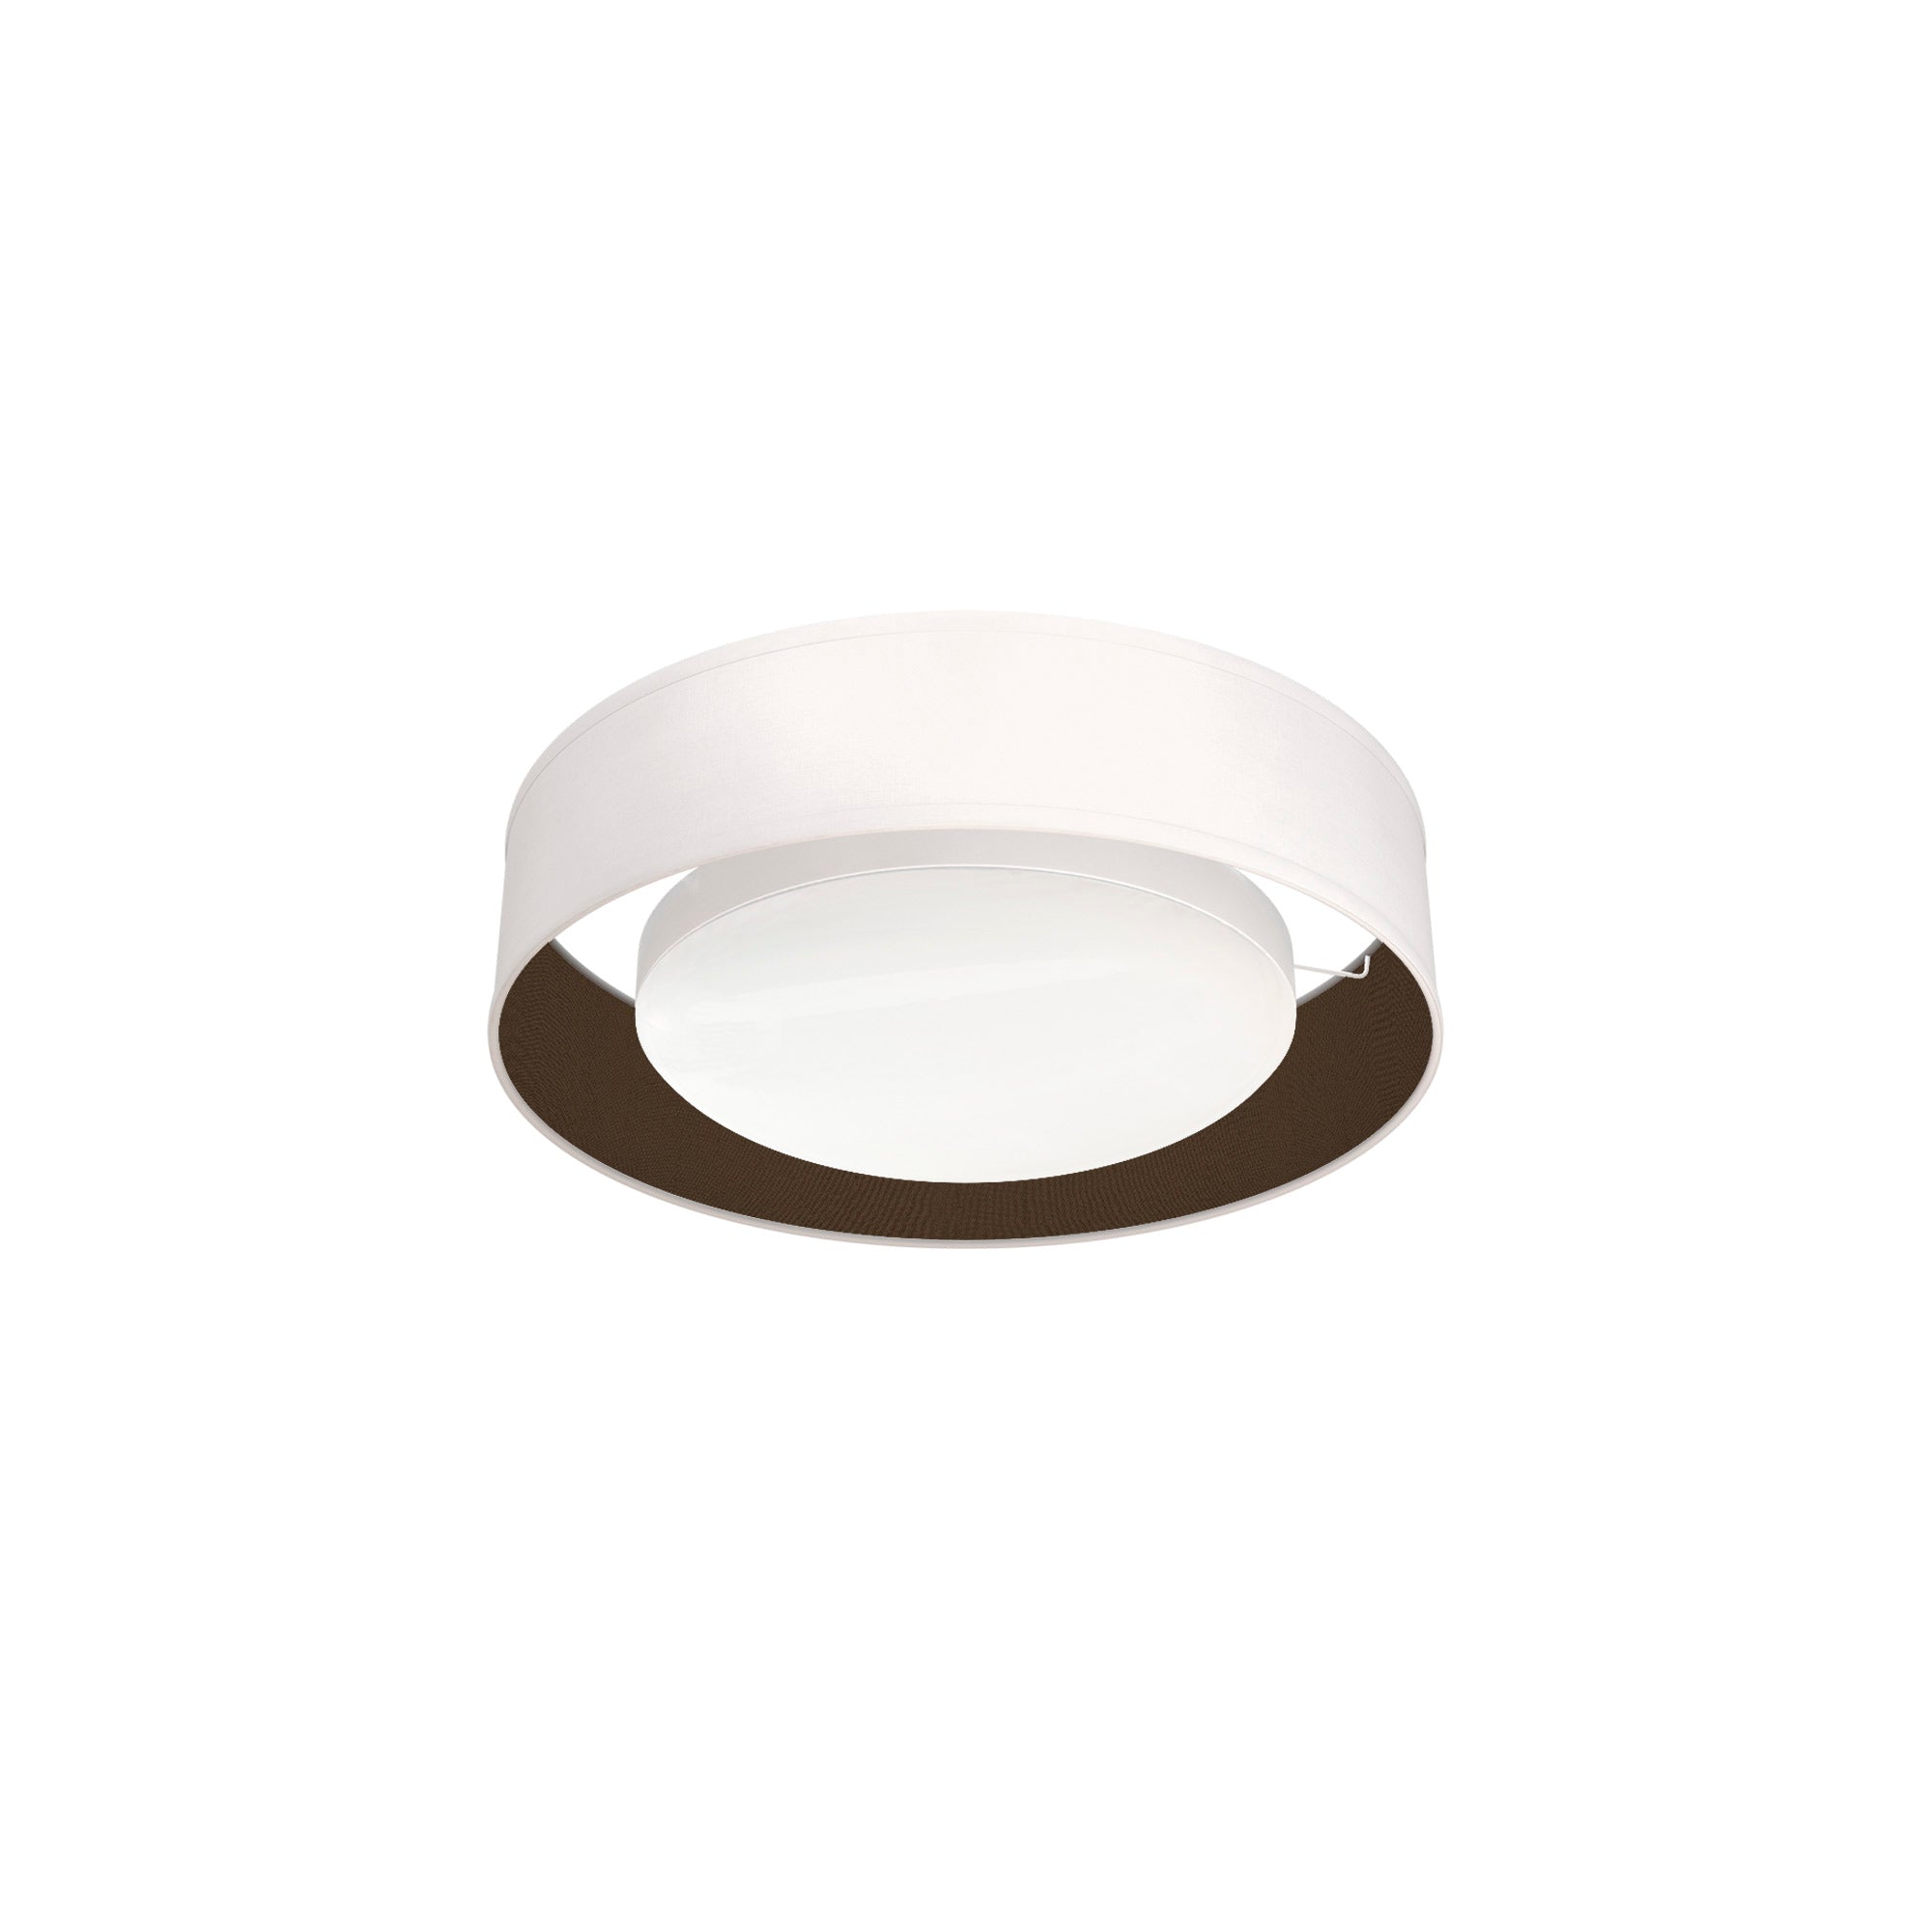 The Vinny Flush Mount from Seascape Fixtures with a silk shade in chocolate color.